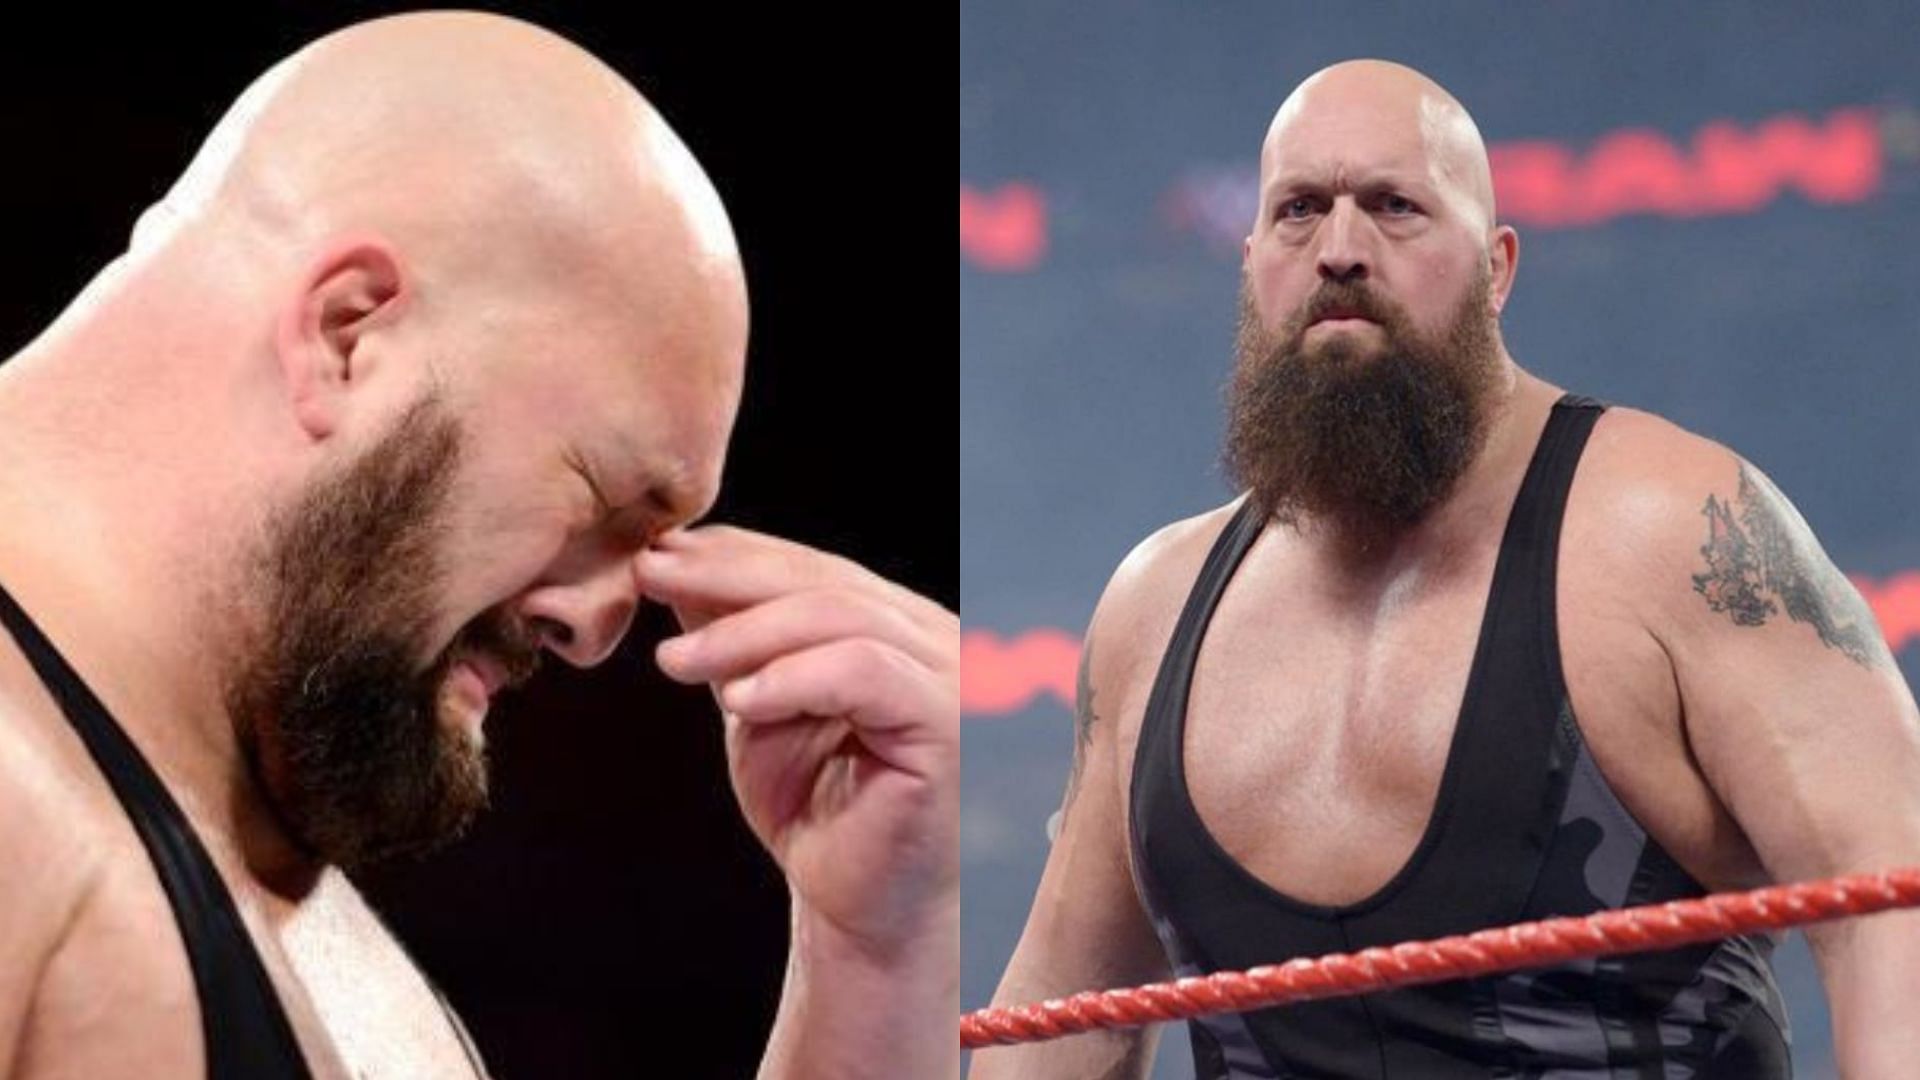 Paul Wight aka The Big Show is currently signed to AEW